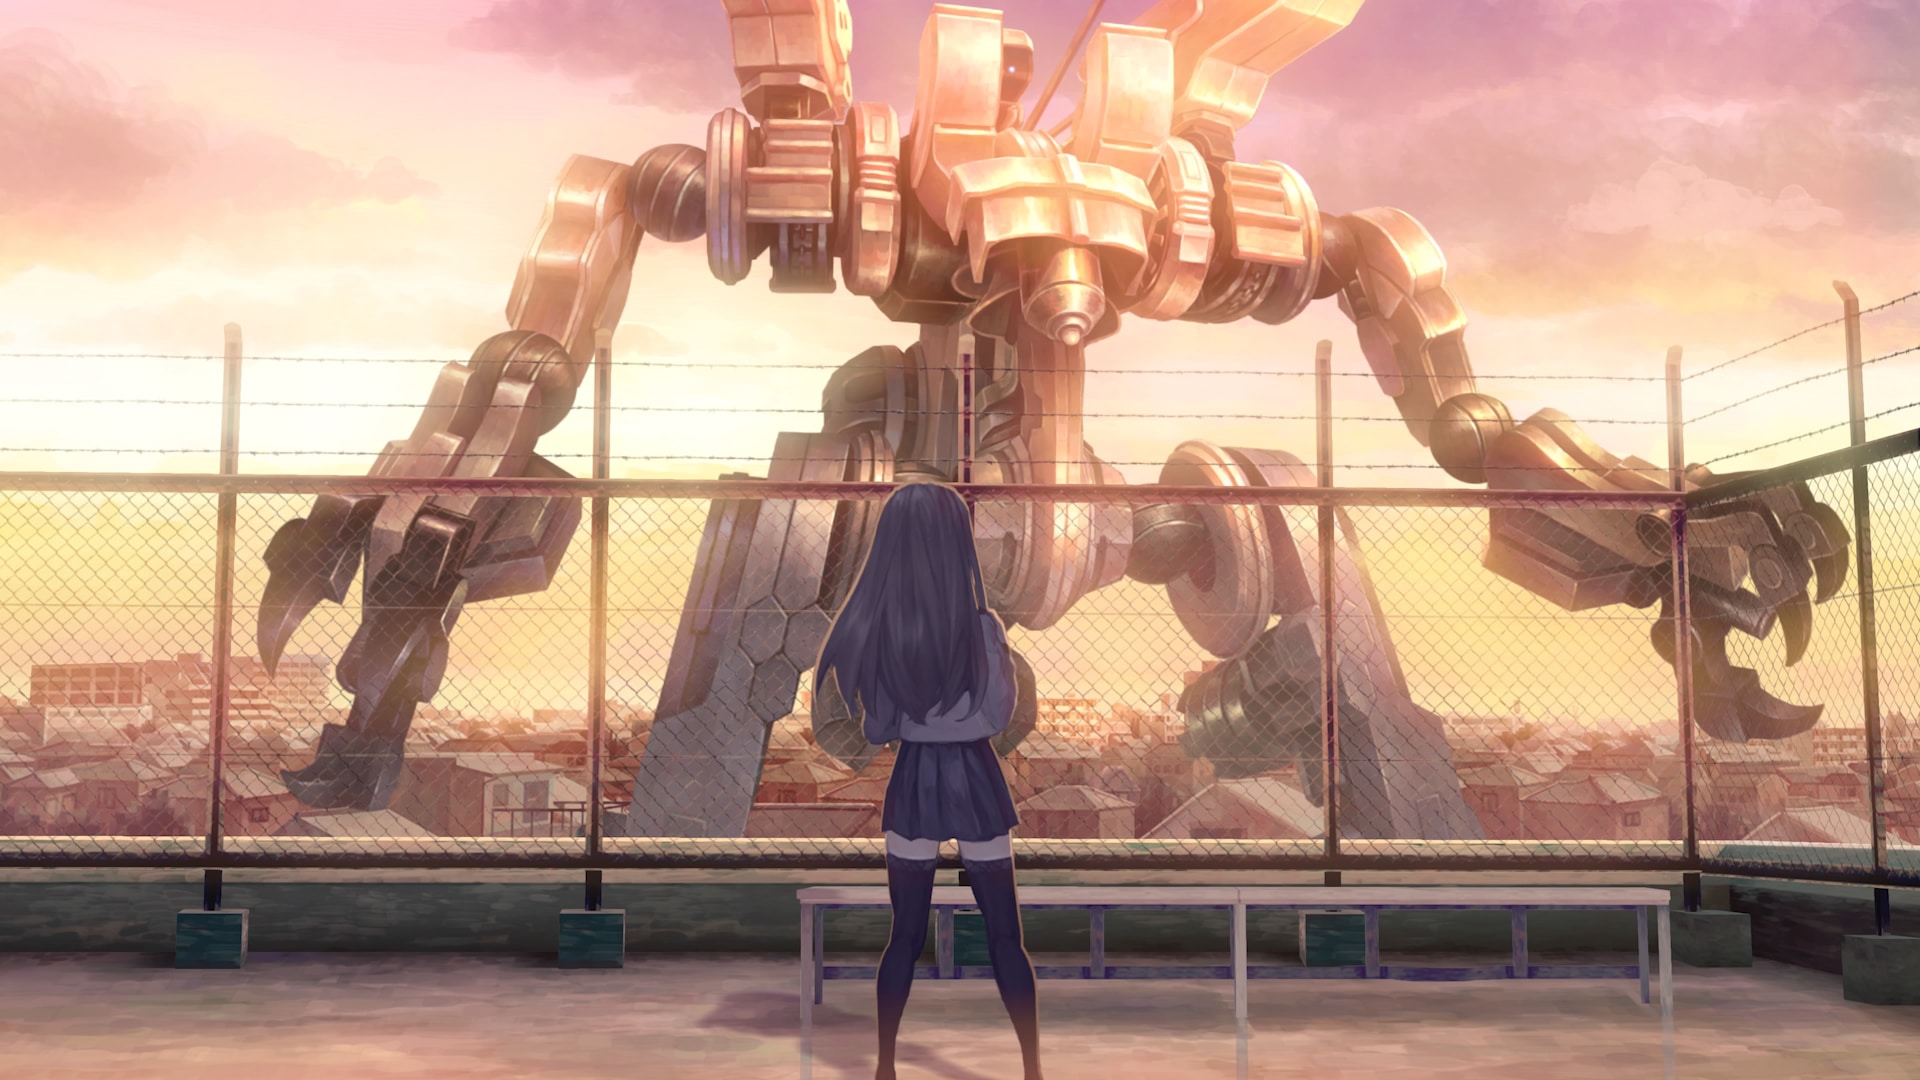 13 Sentinels: Aegis Rim Launches in the West to Critical Praise